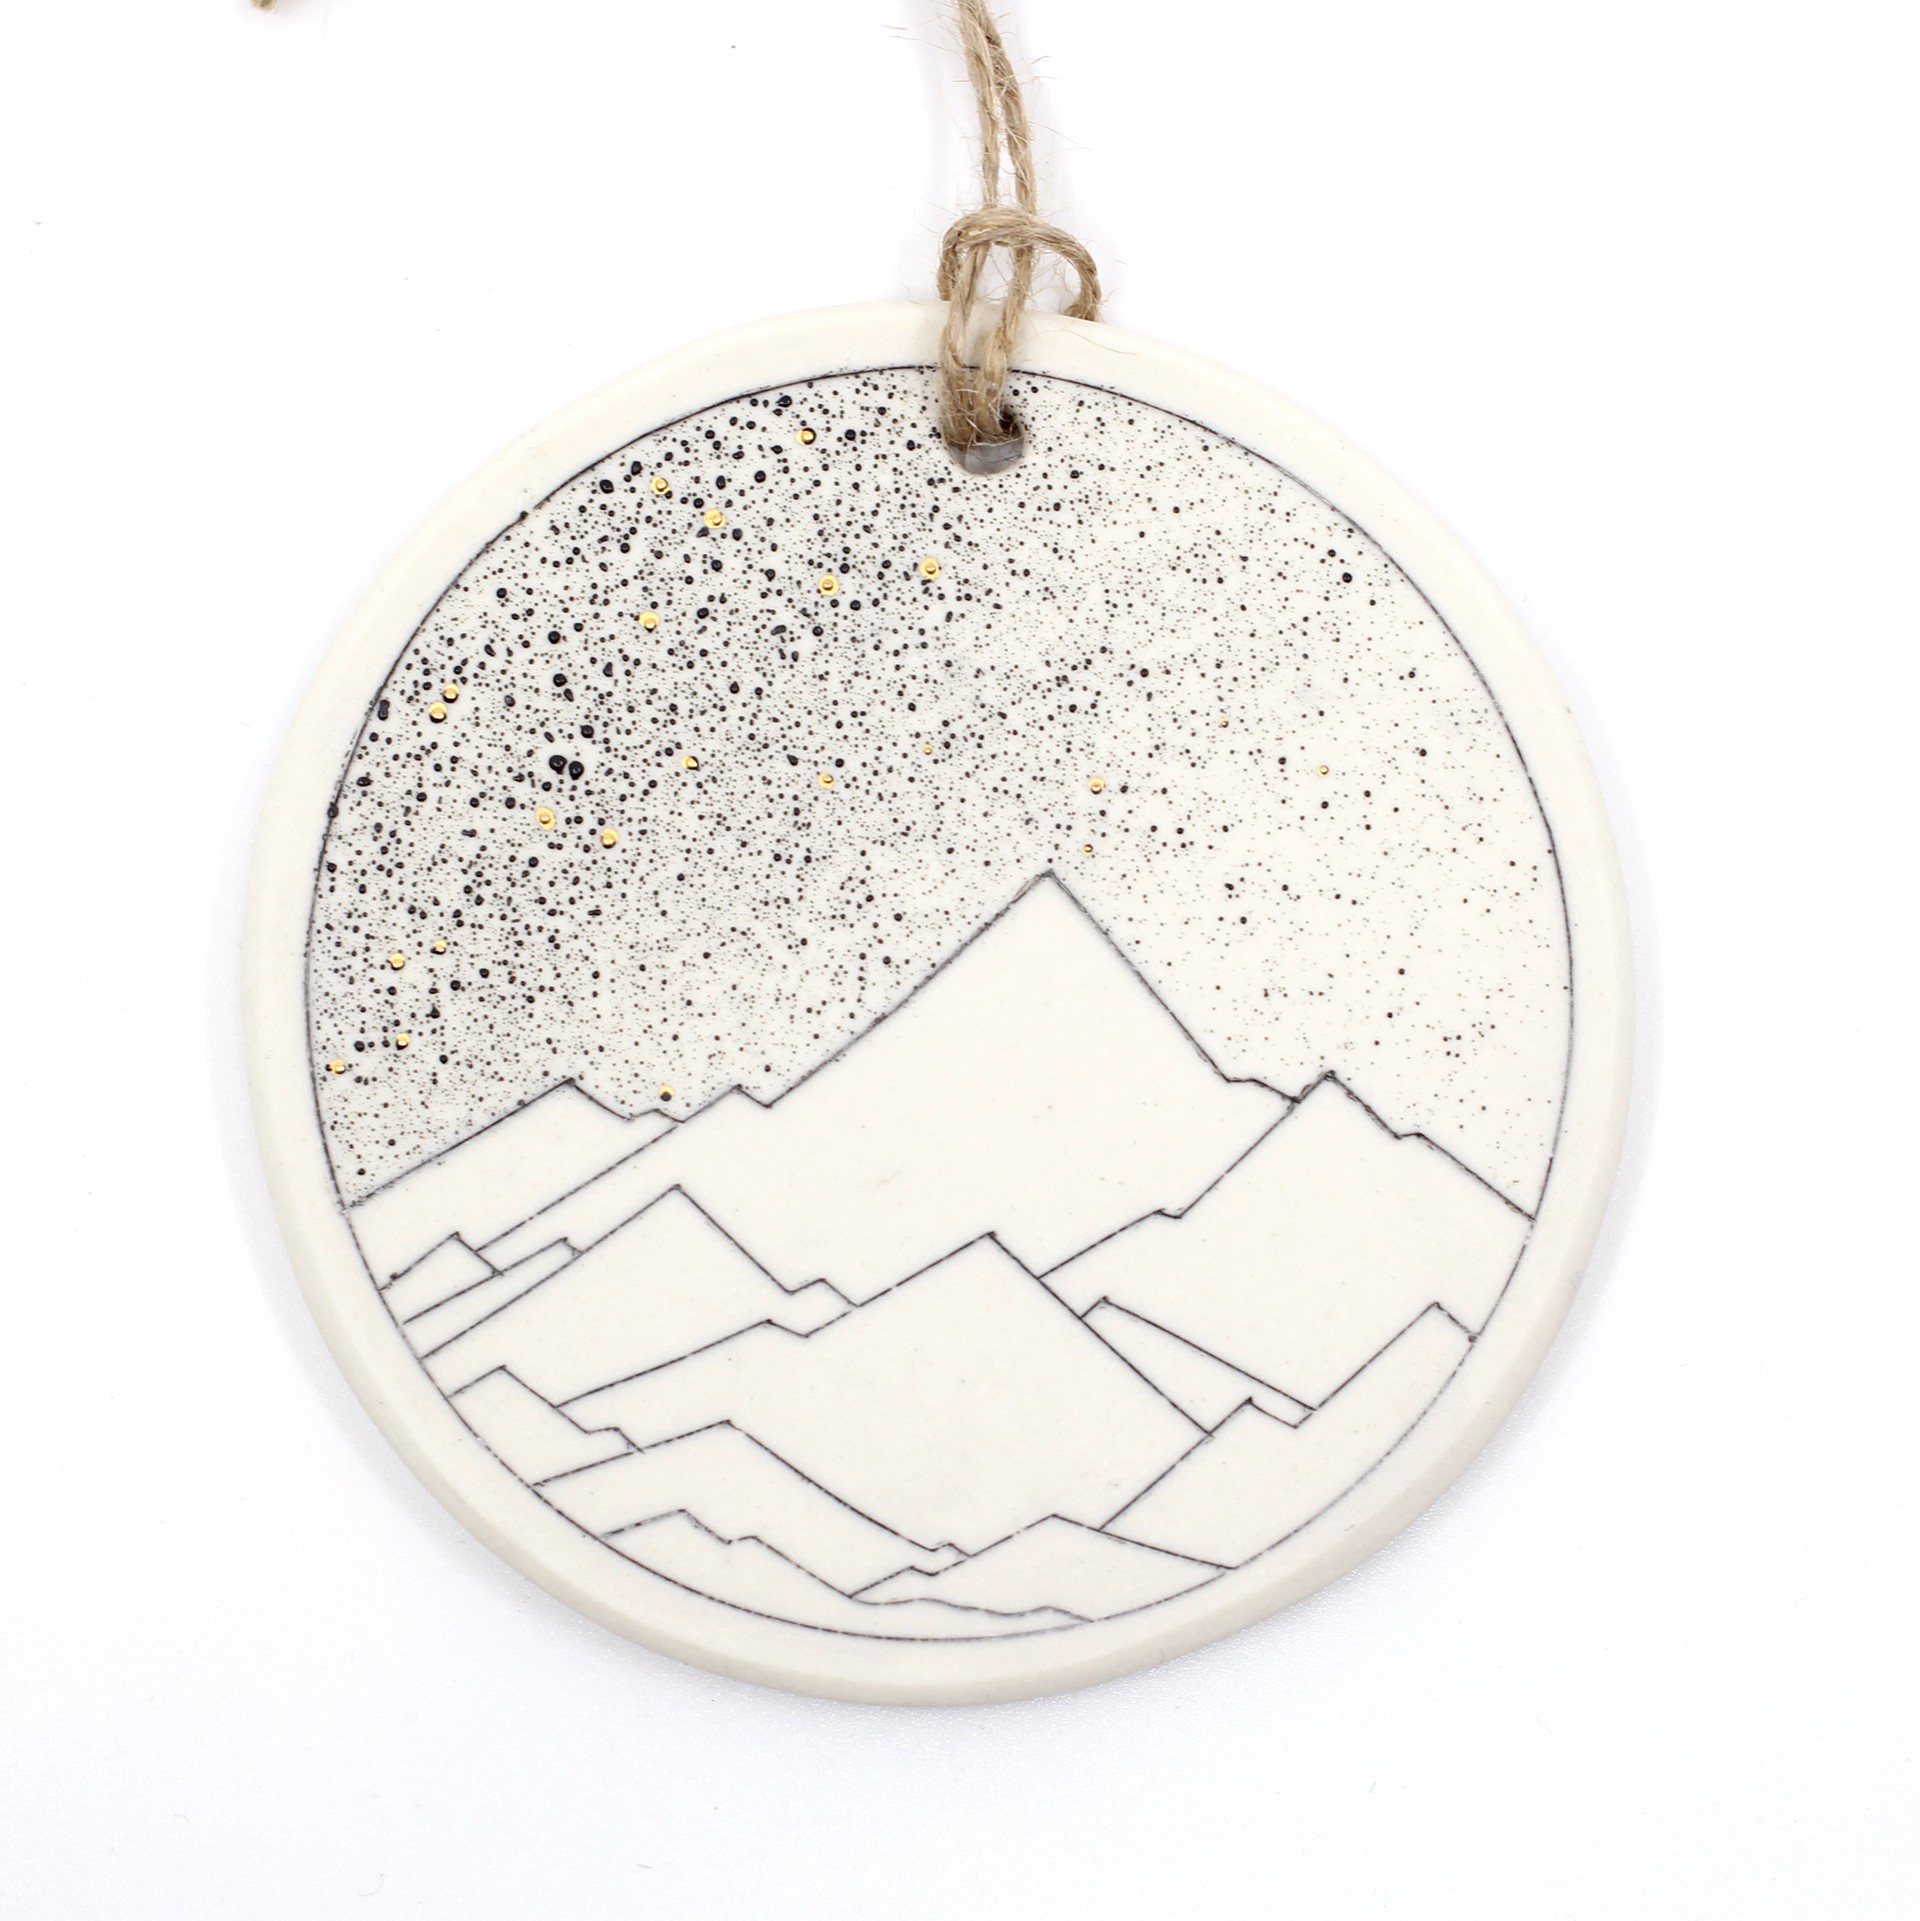 Mountain Ornament by Bianka Groves